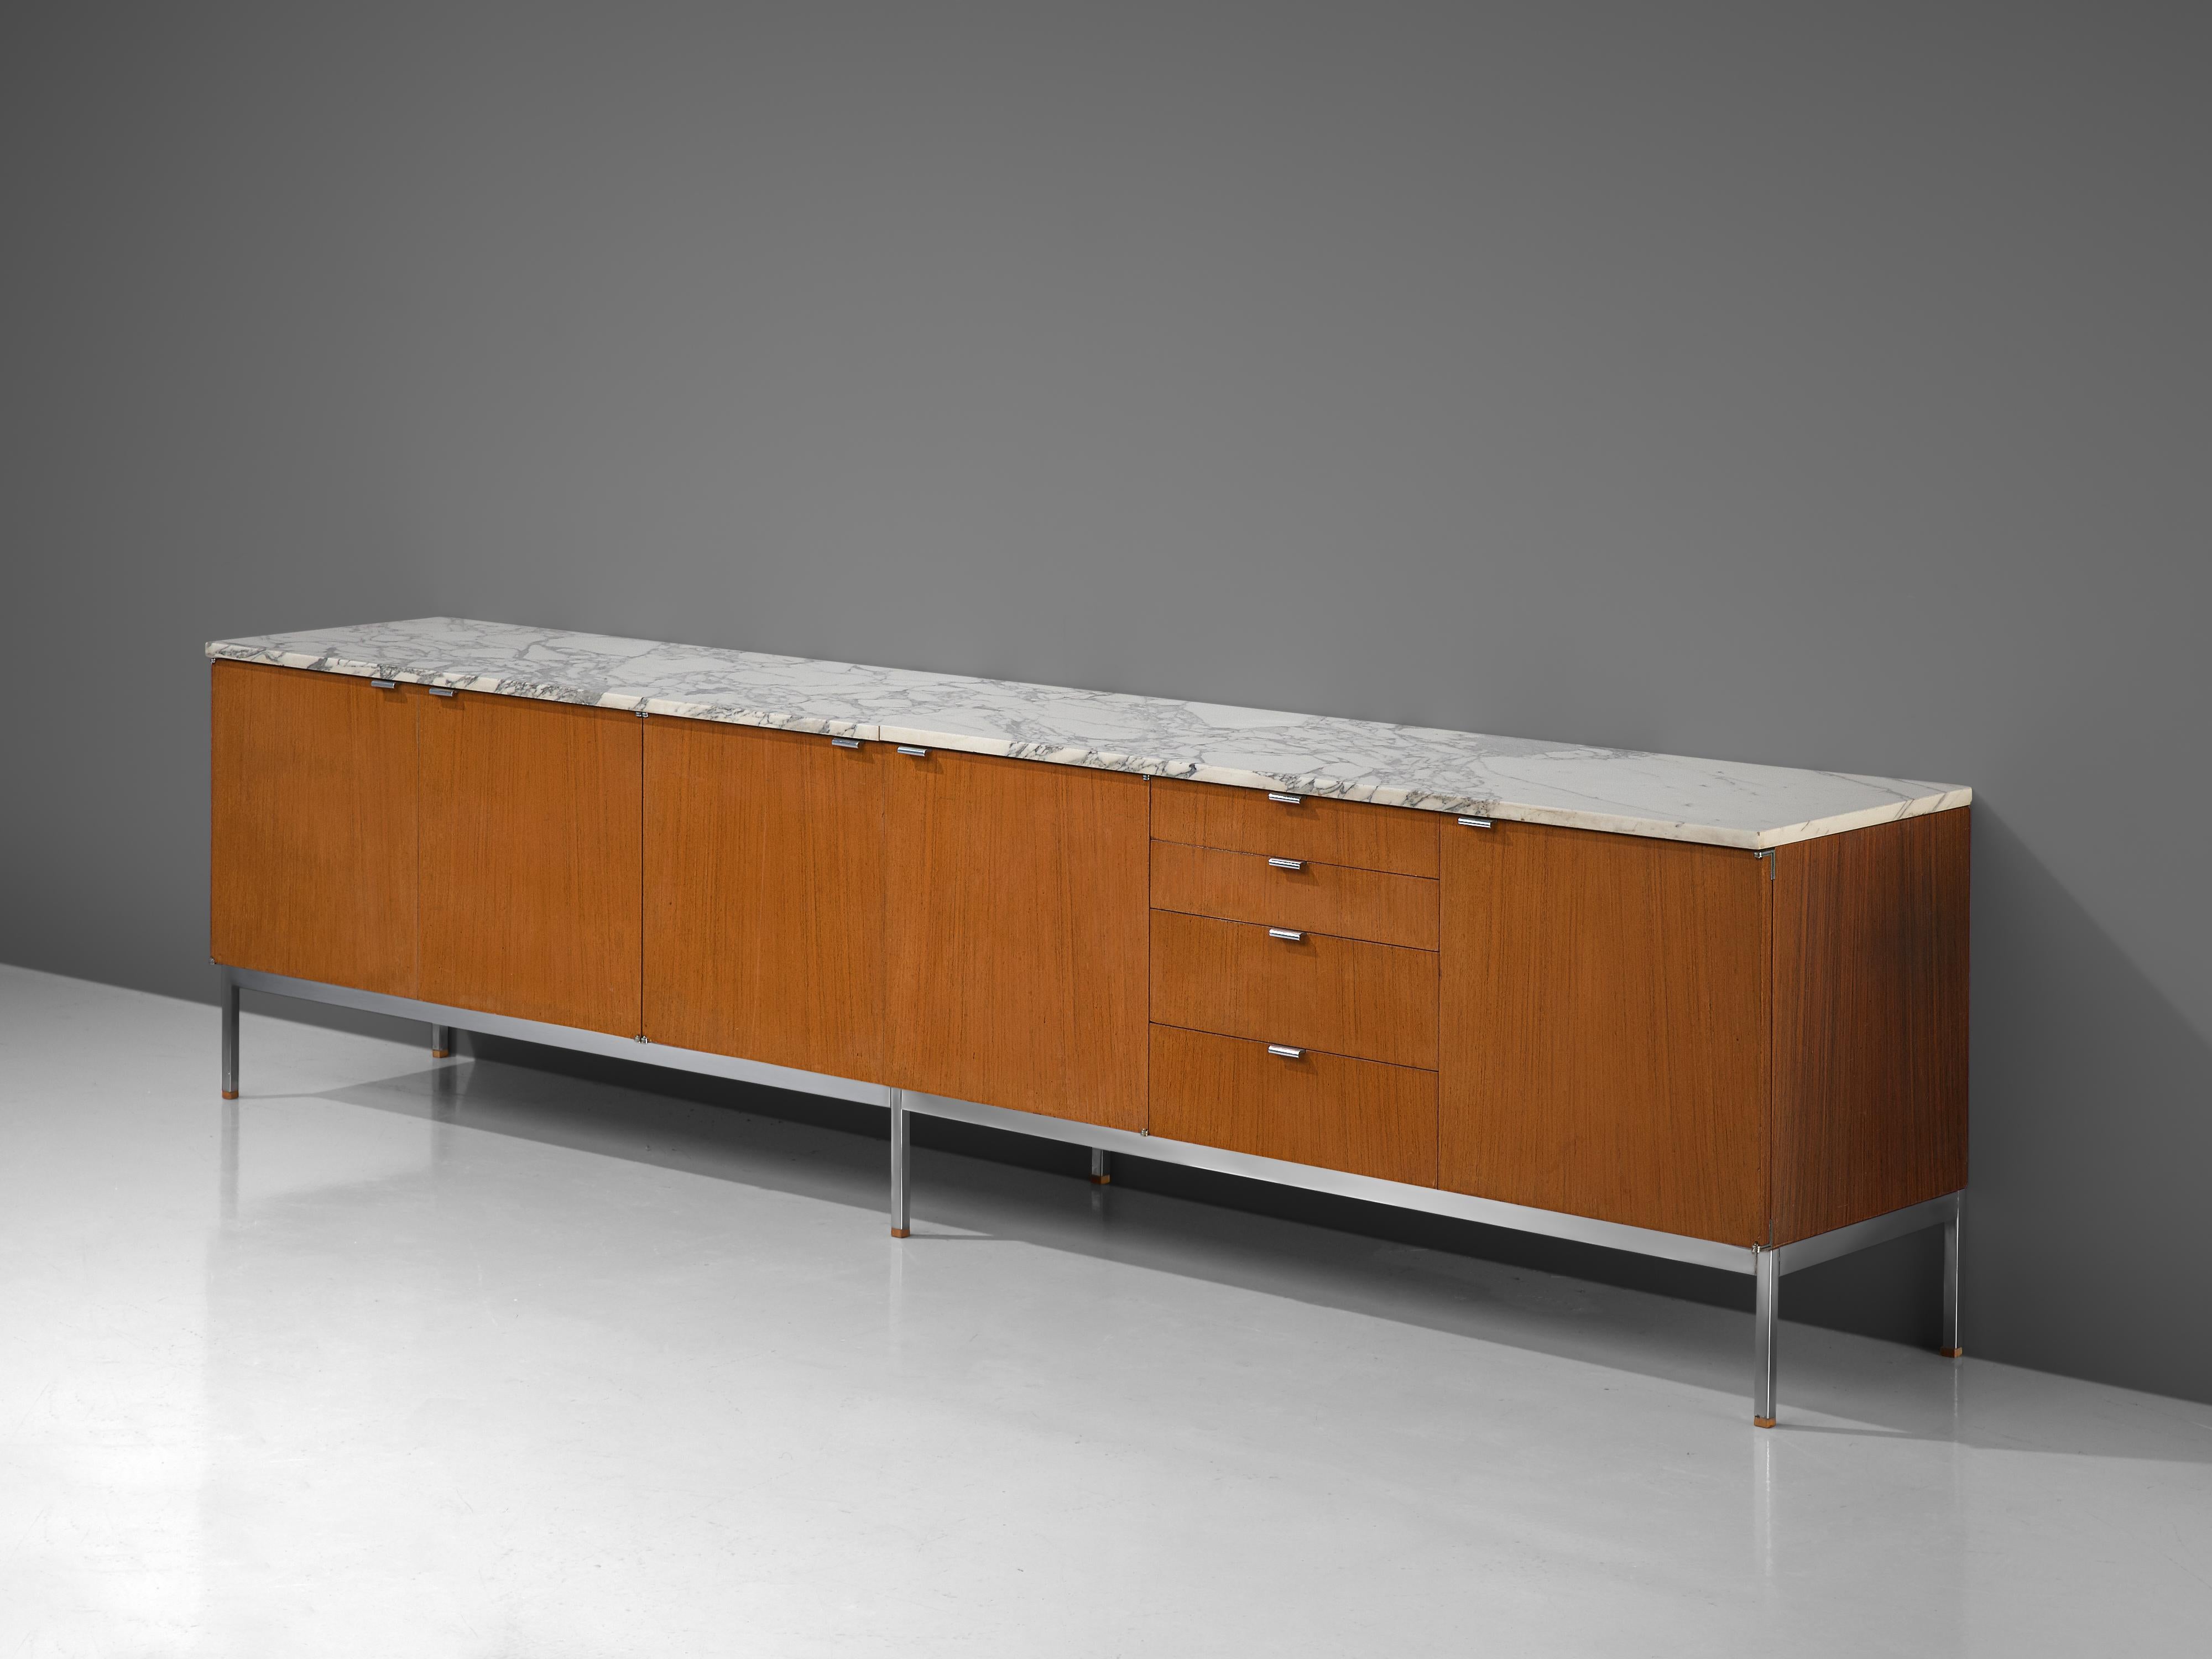 Florence Knoll for Knoll International, sideboard, teak, marble, metal, United States, design 1961

Iconic credenza with chromed base and marble top designed by Florence Knoll for Knoll International. It is rare to find sideboard with the length